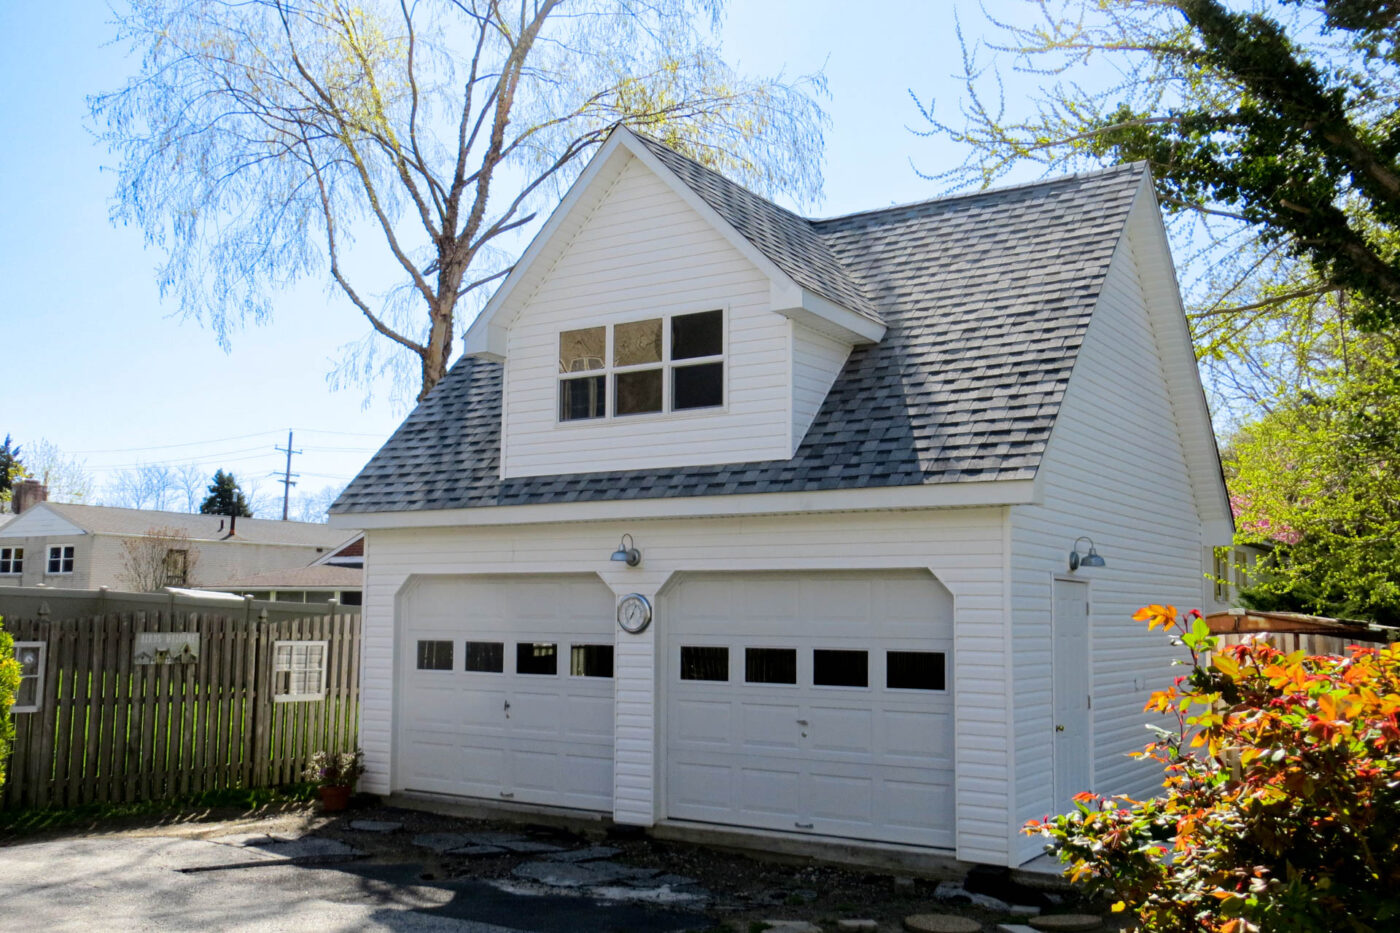 2-car garage for sale in Syracuse, NY